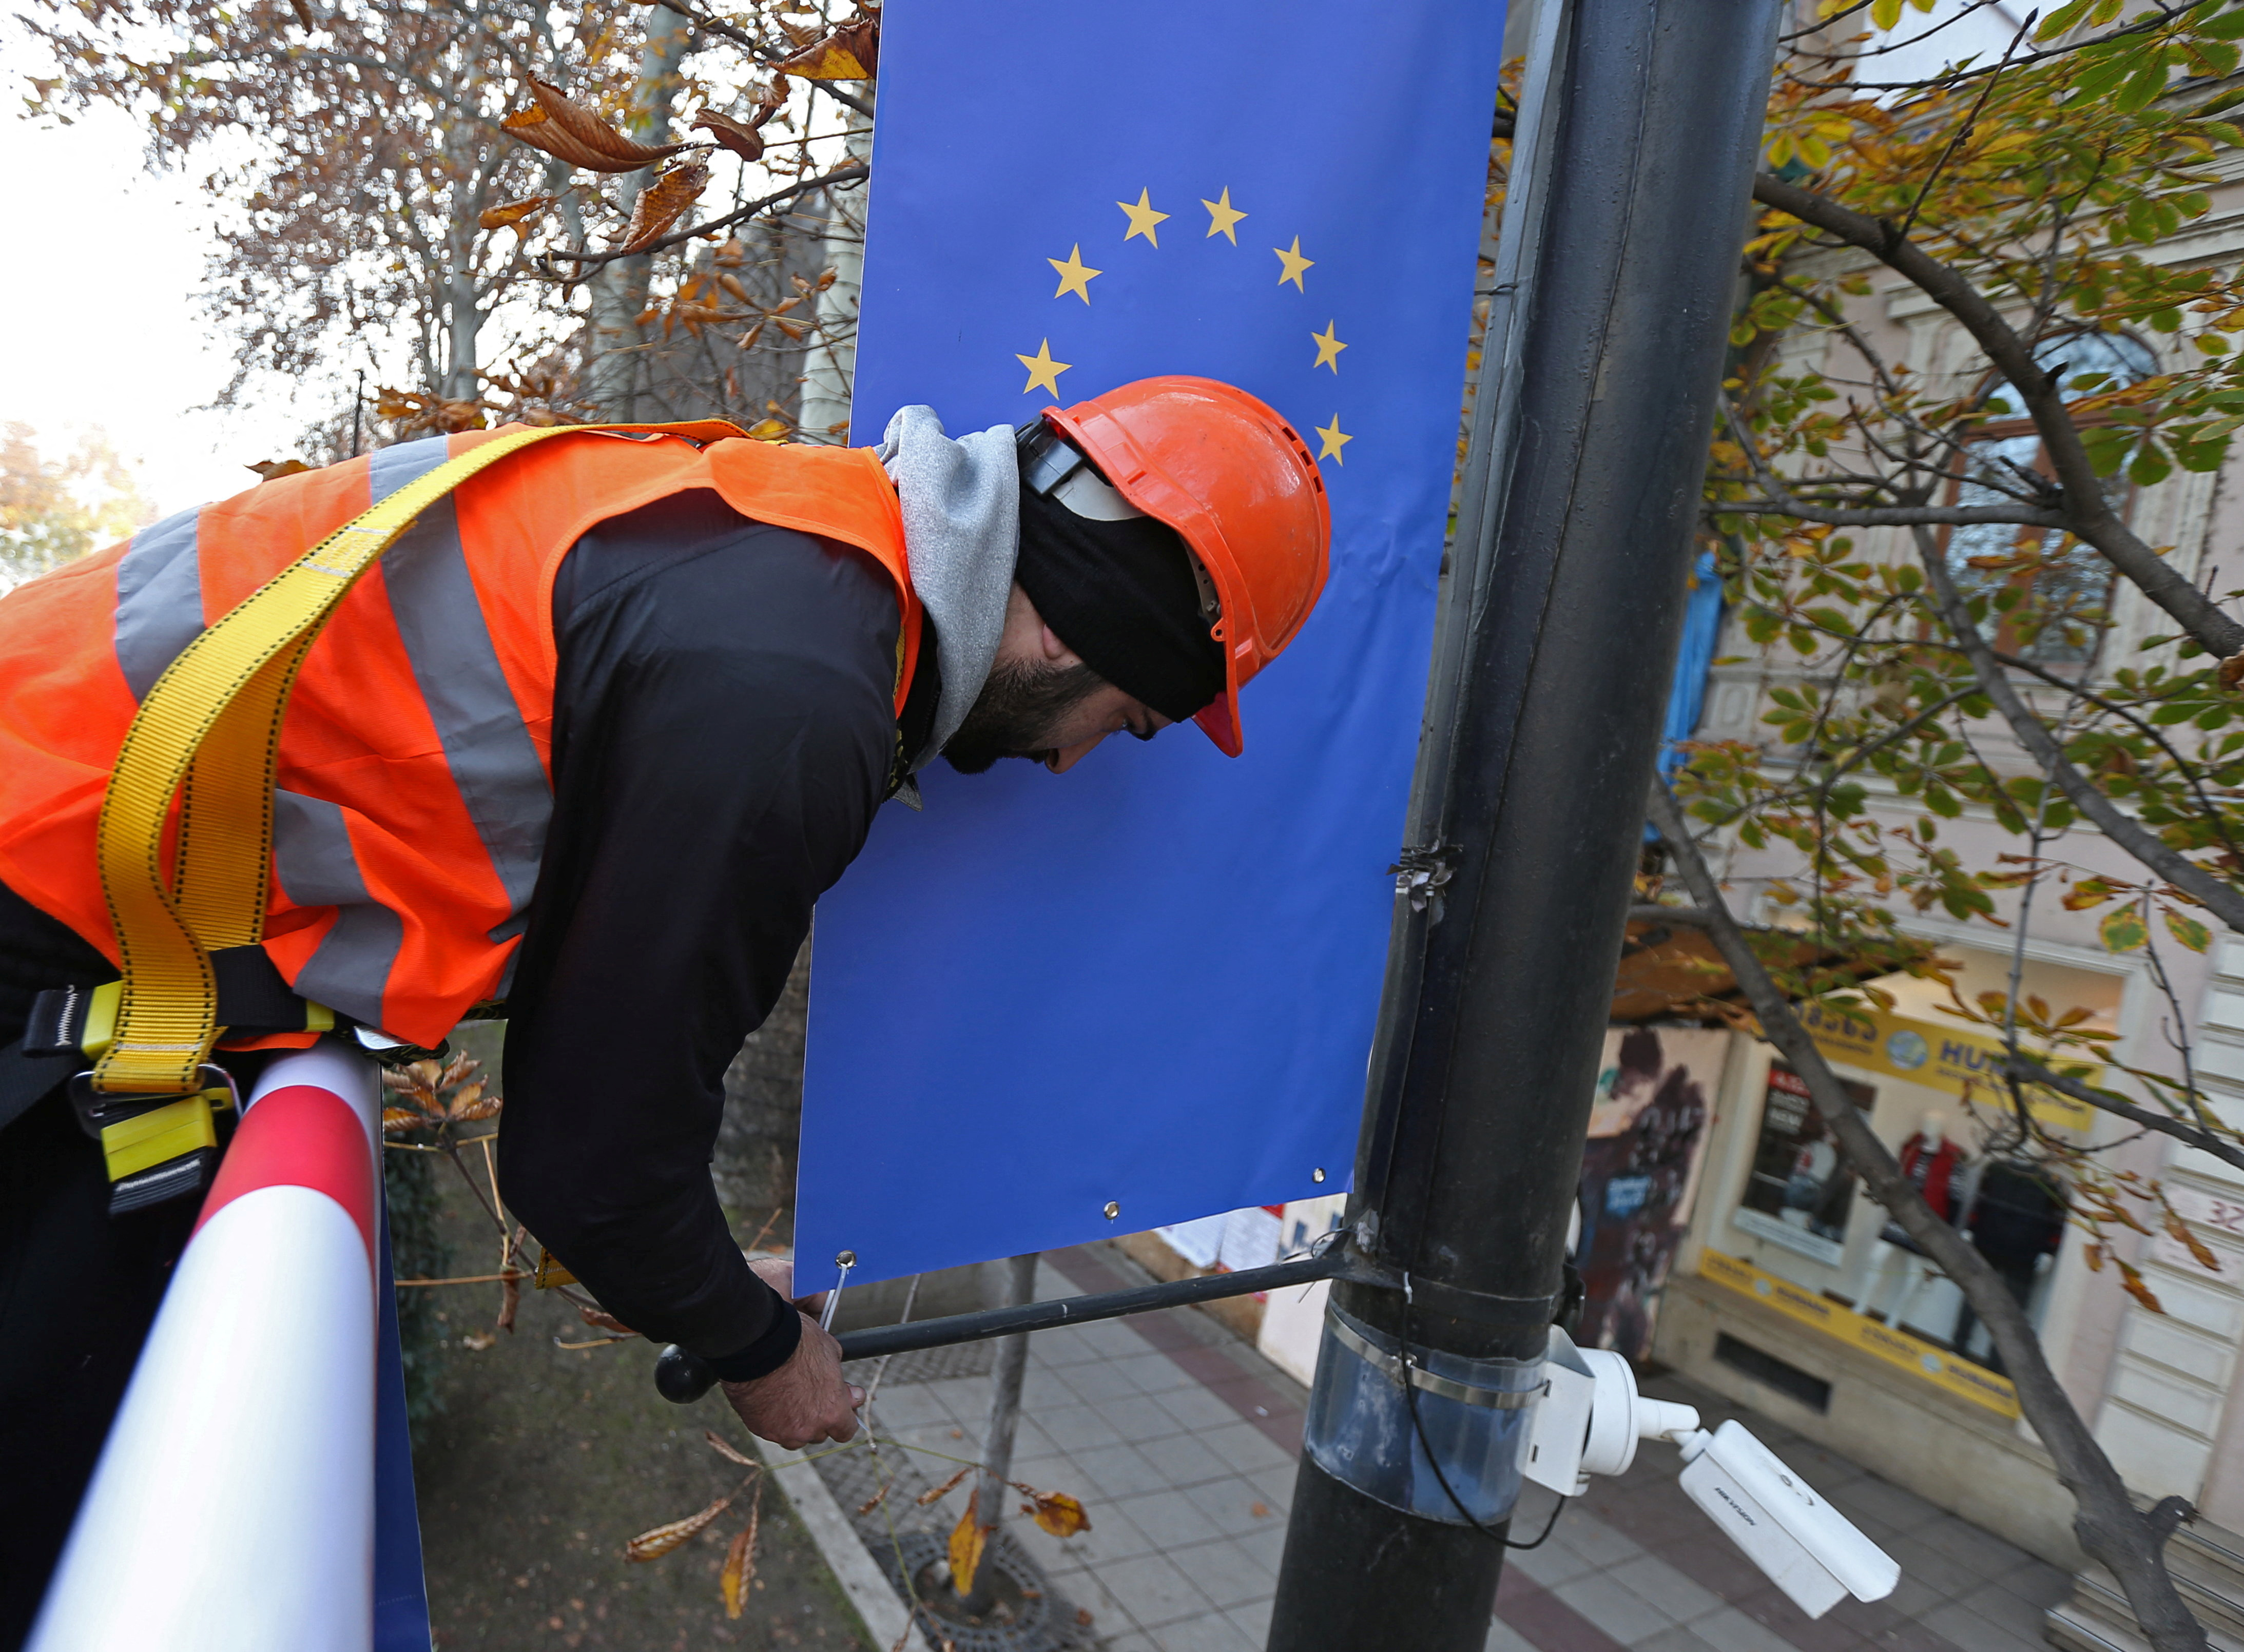 A worker hangs a banner with a European Union flag in Tbilisi